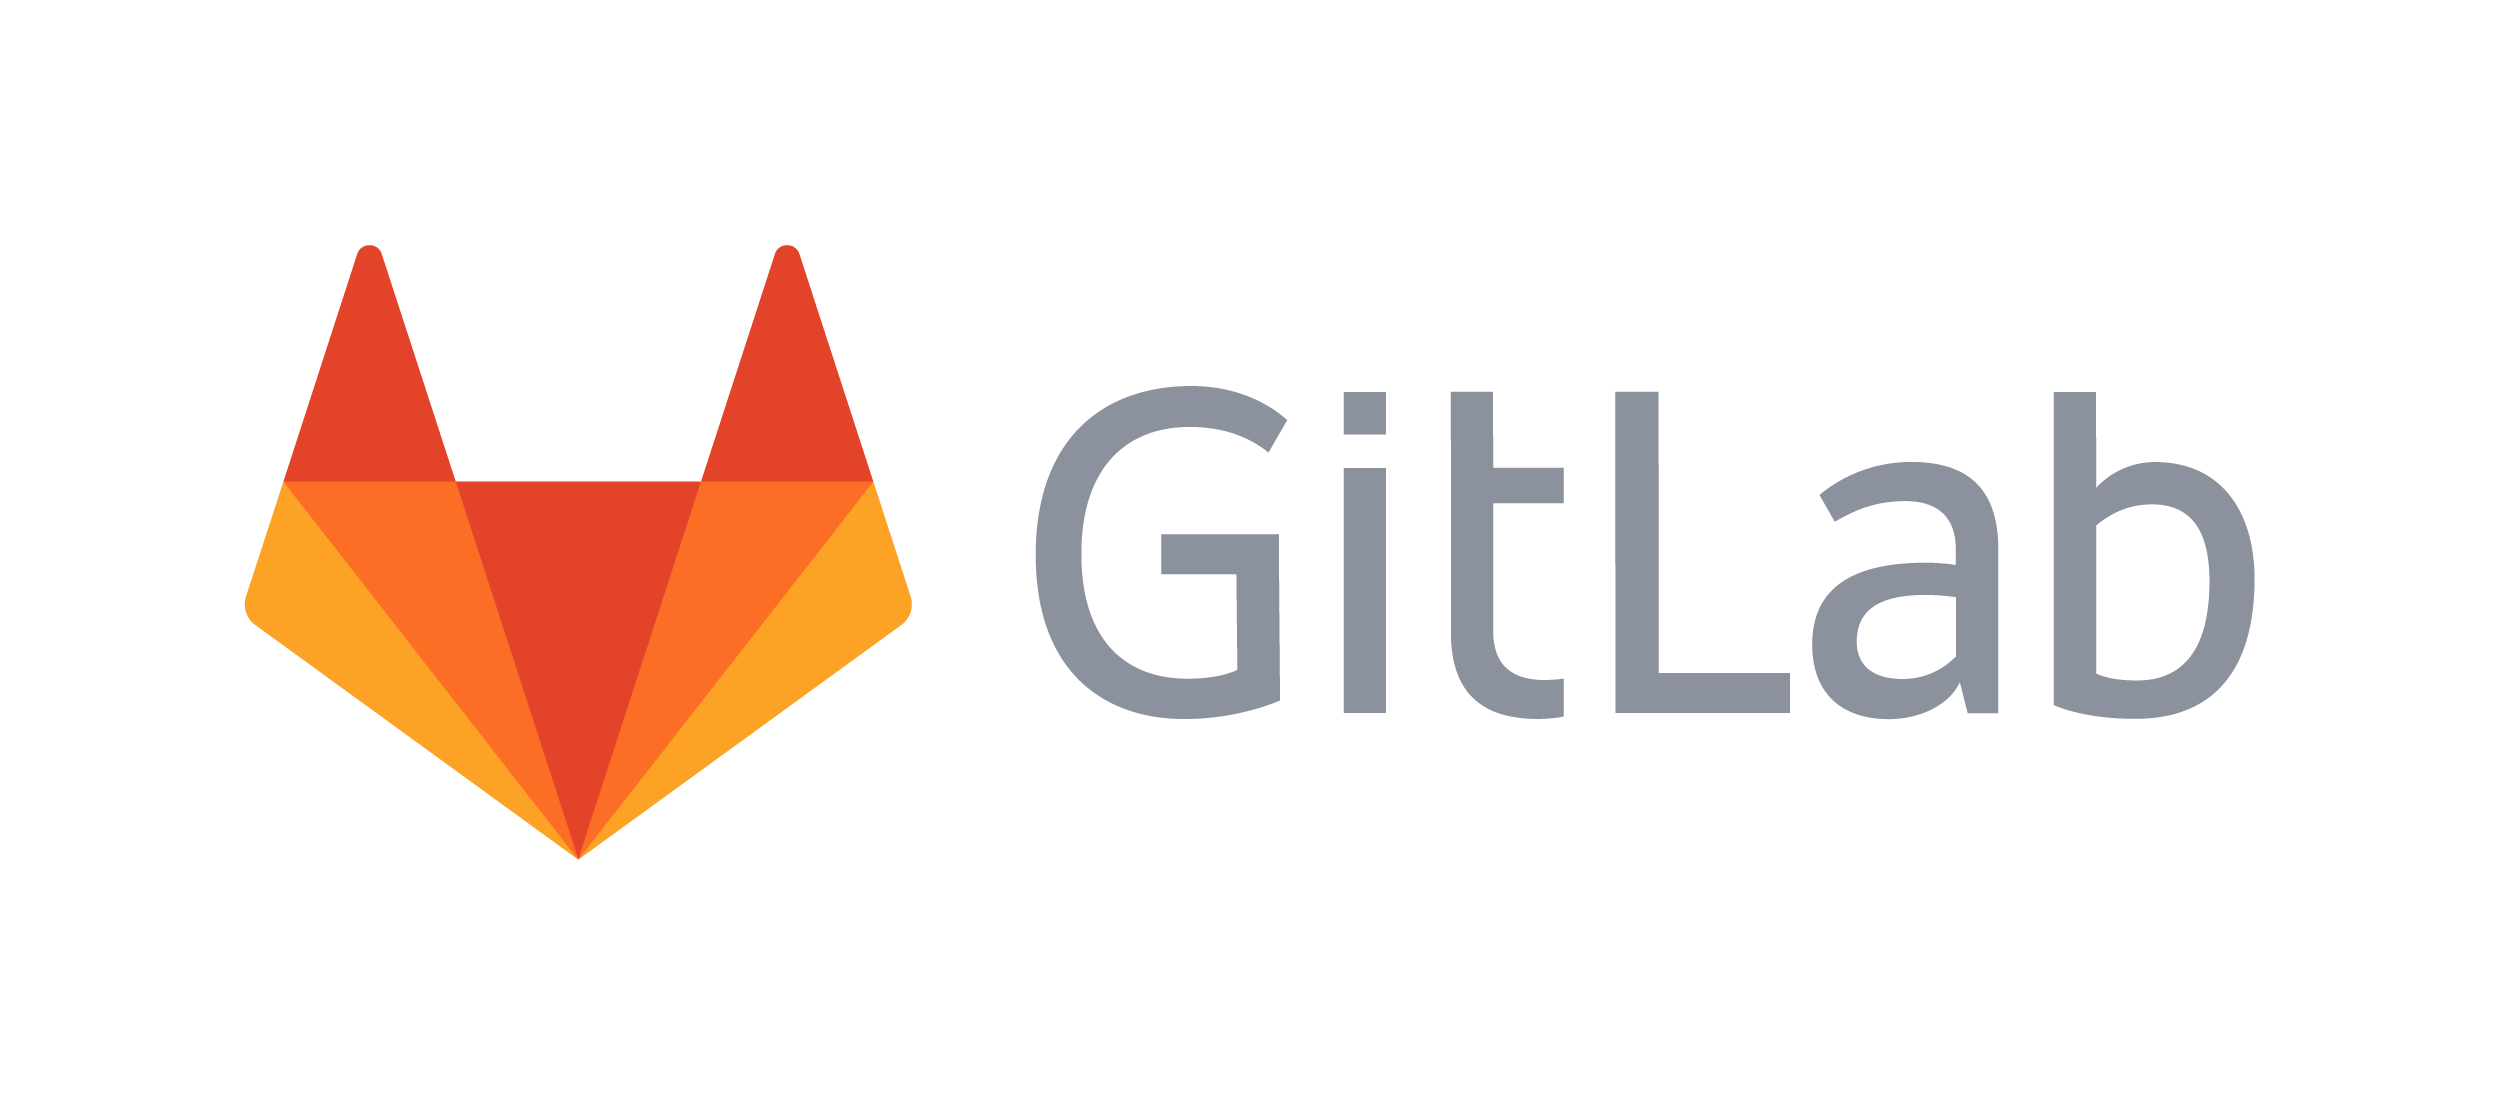 GitLab, Sumo Logic And Some Other Big Stocks Moving Higher In Today's Pre-Market Session